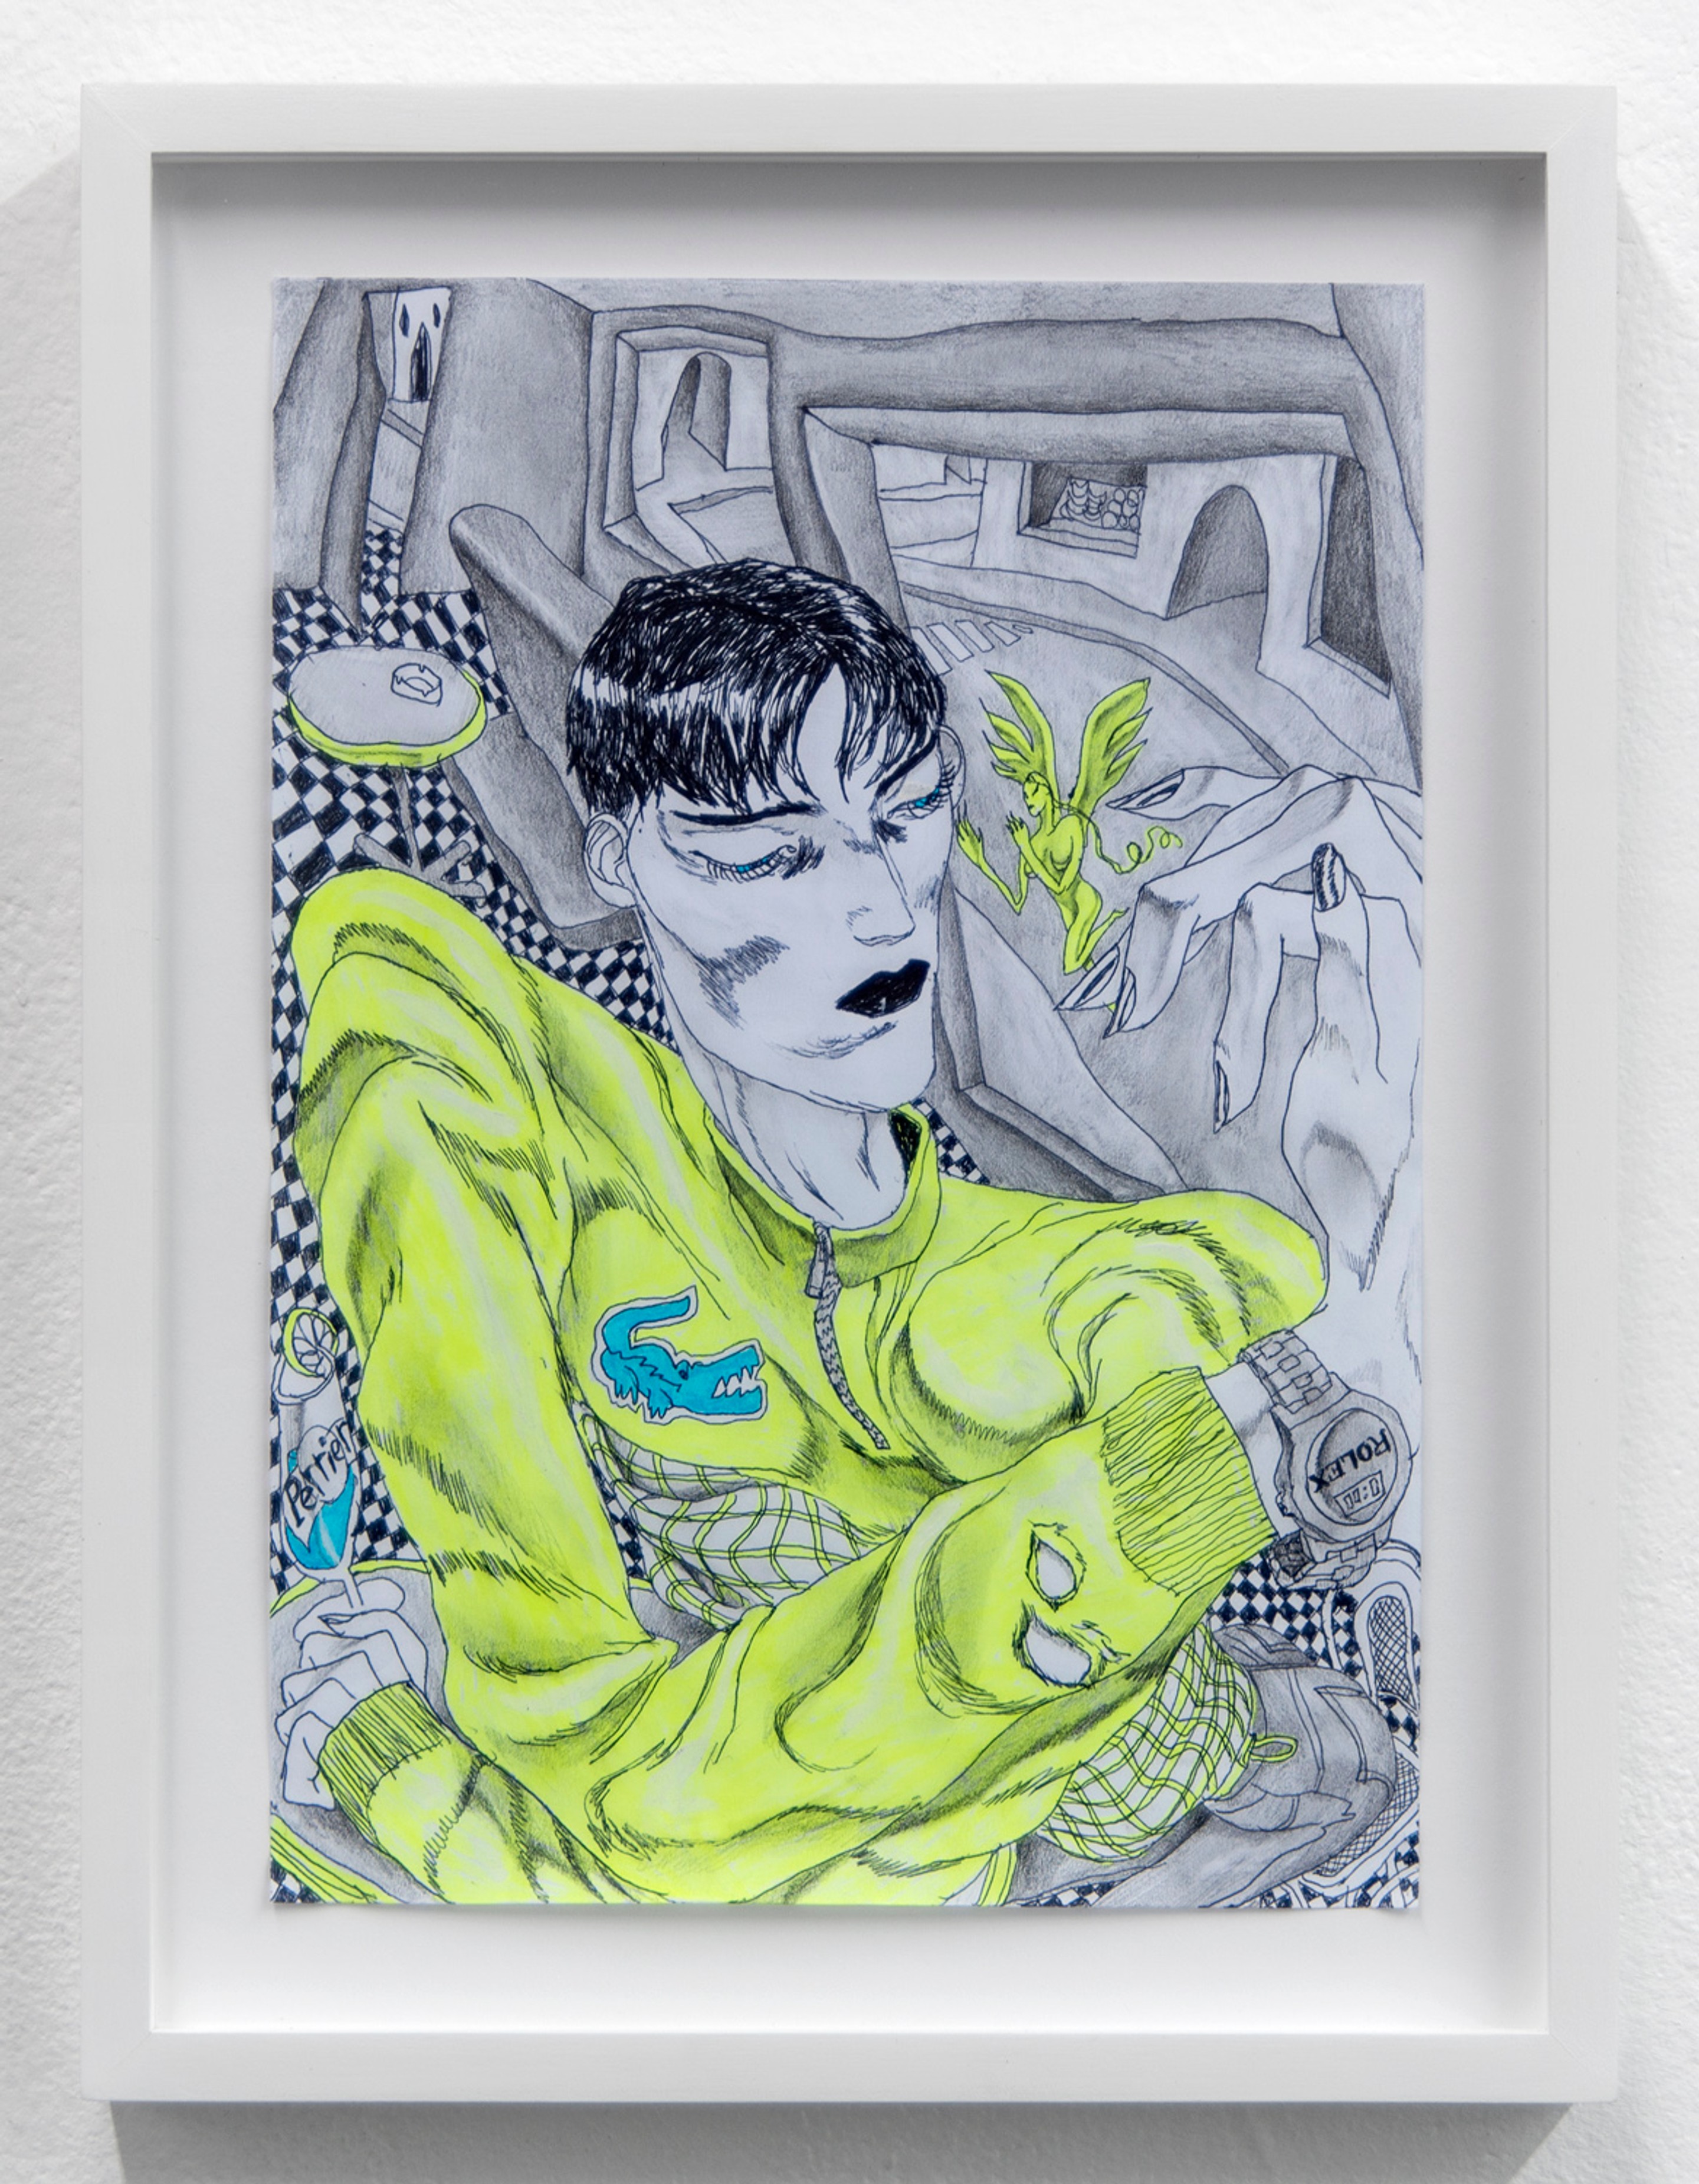 David Rappeneau, Untitled (2017)
Acrylic, ballpoint pen, pencil, charcoal pencil and fluorescent marker on paper. 11.75h x 8.25w in